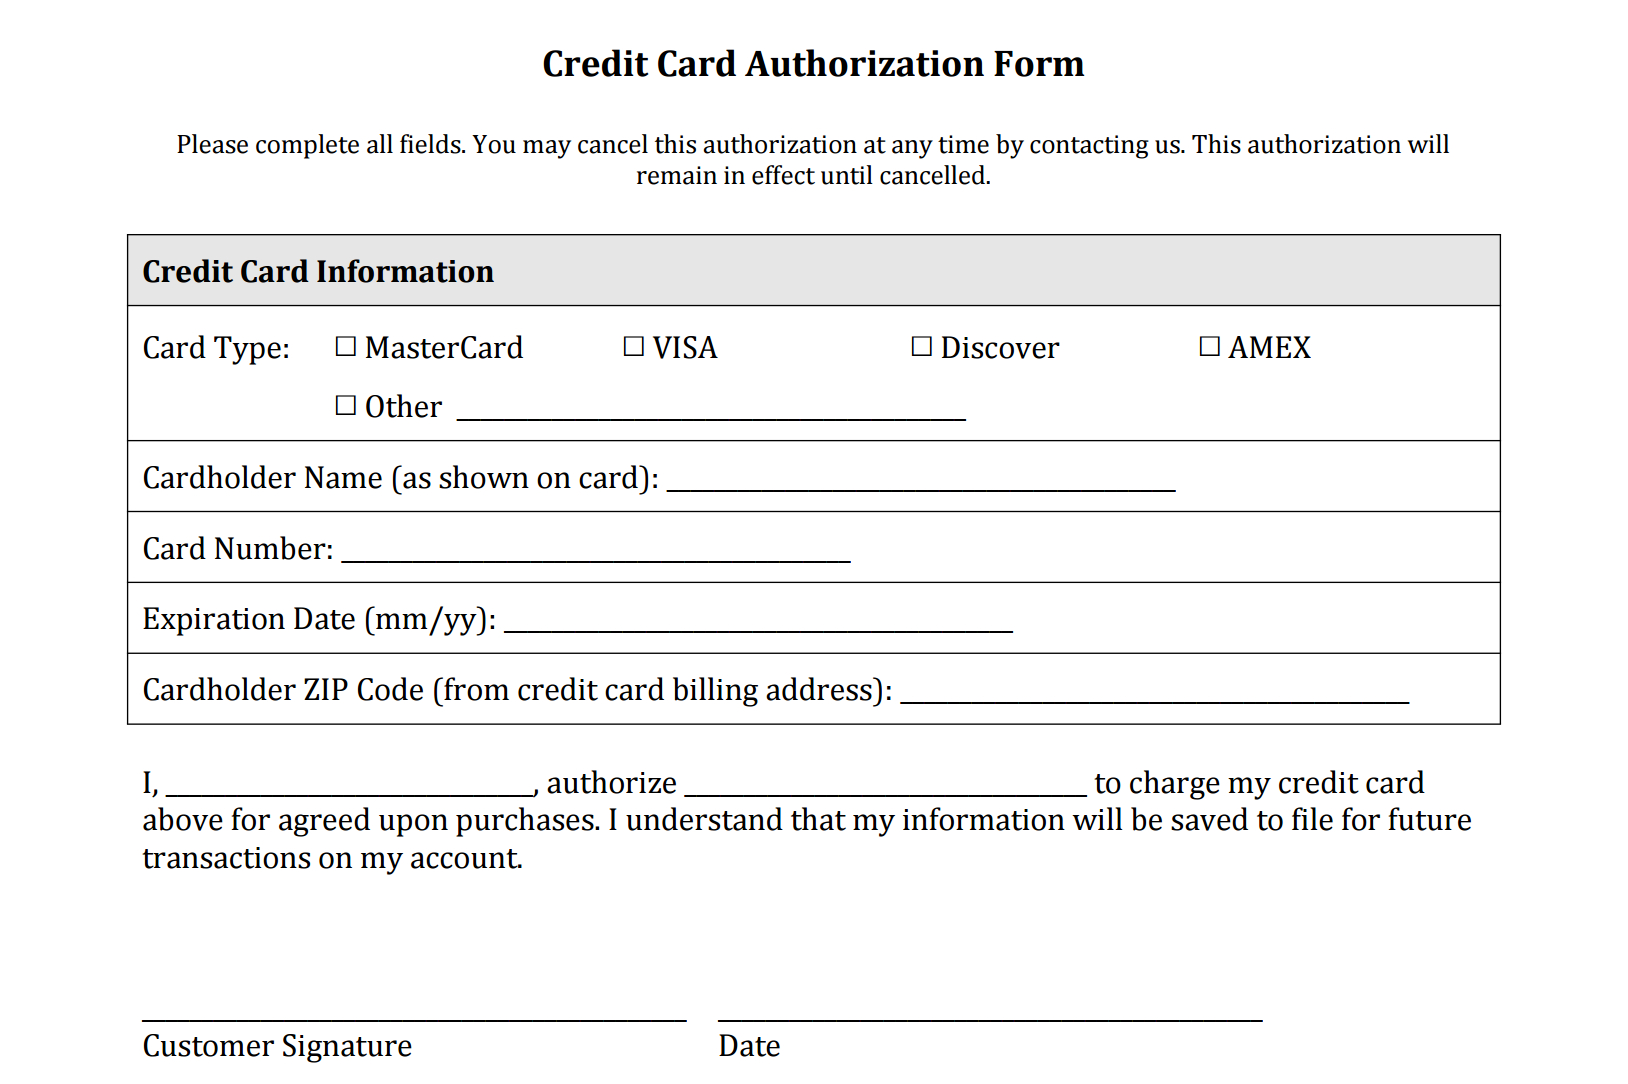 Credit Card Authorisation Form Template Australia – Calep Regarding Credit Card Authorisation Form Template Australia